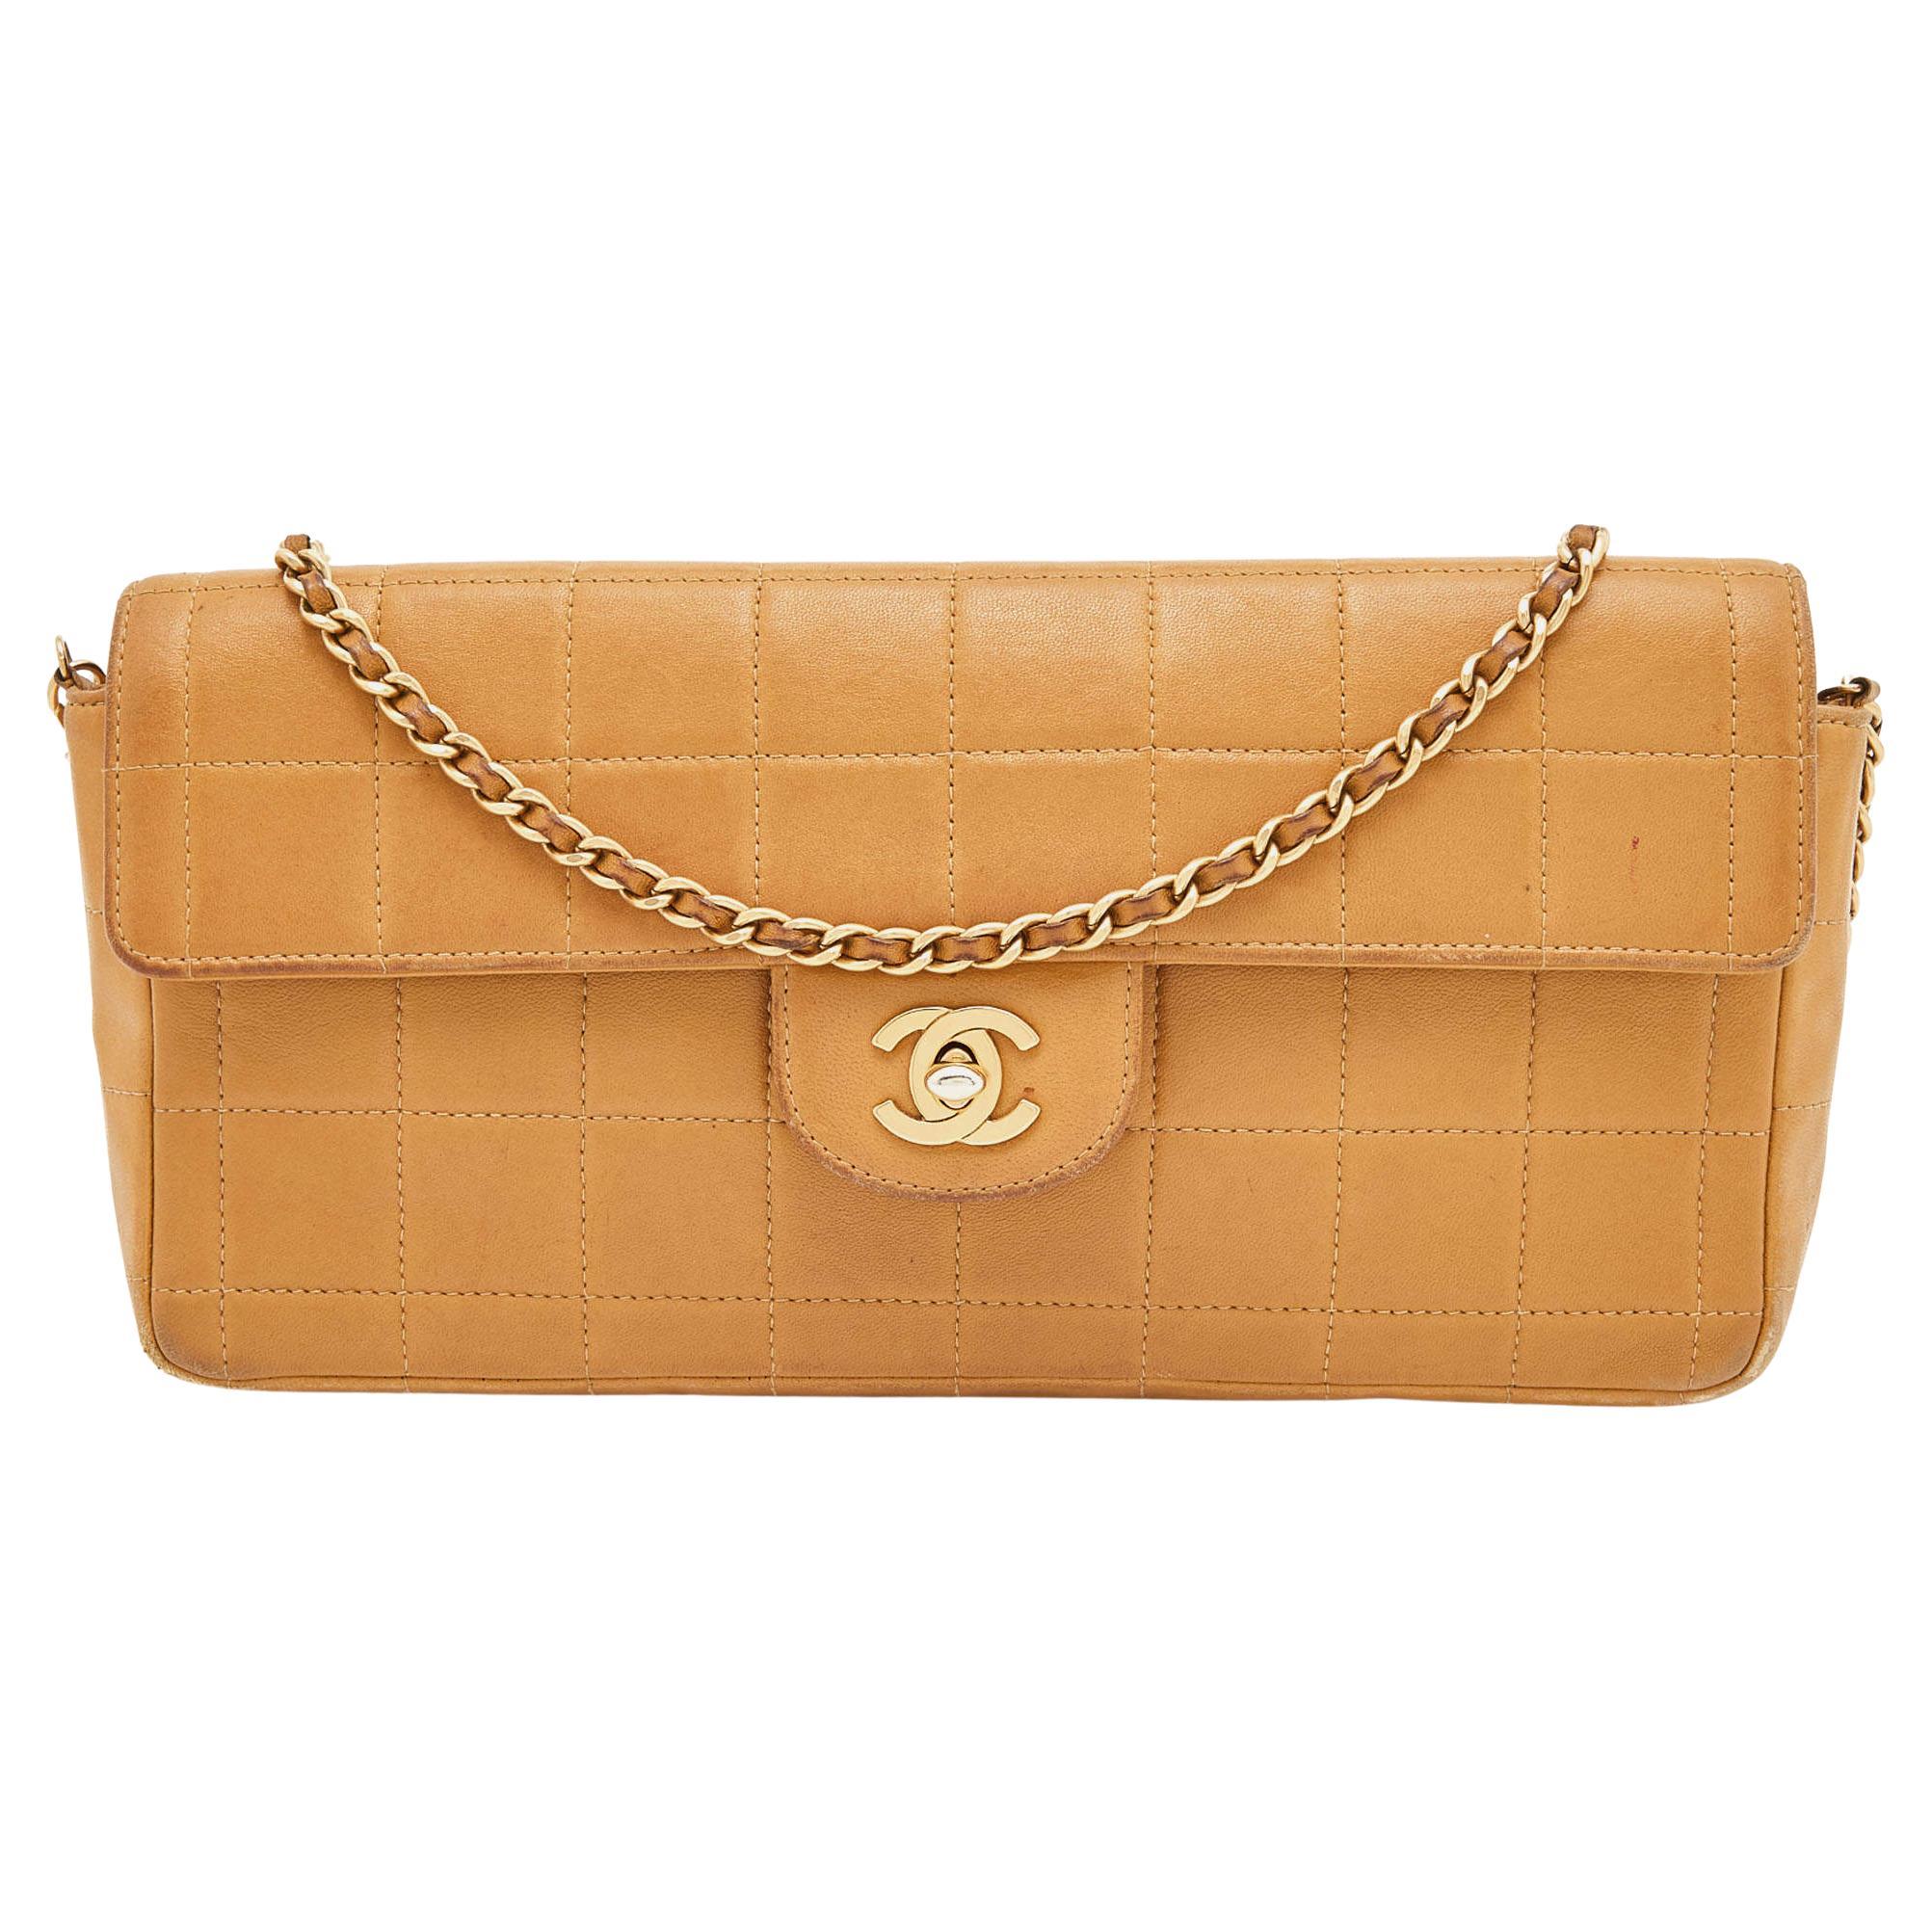 Chanel Beige Chocolate Bar Quilted Leather East West Flap Bag